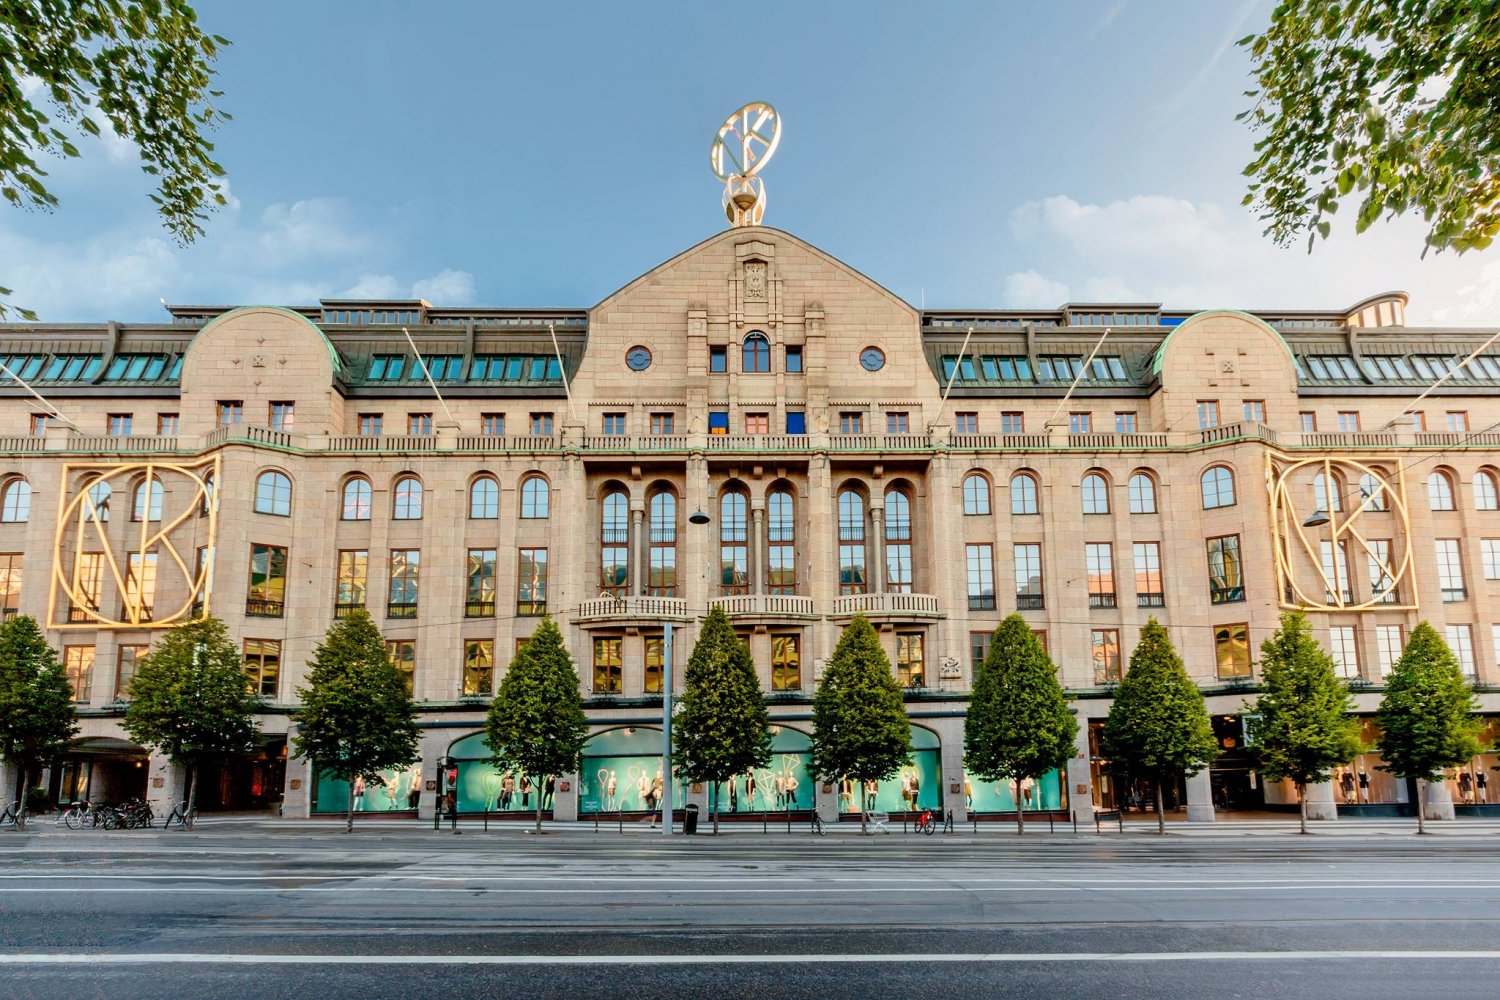 Best Shopping Malls in Stockholm